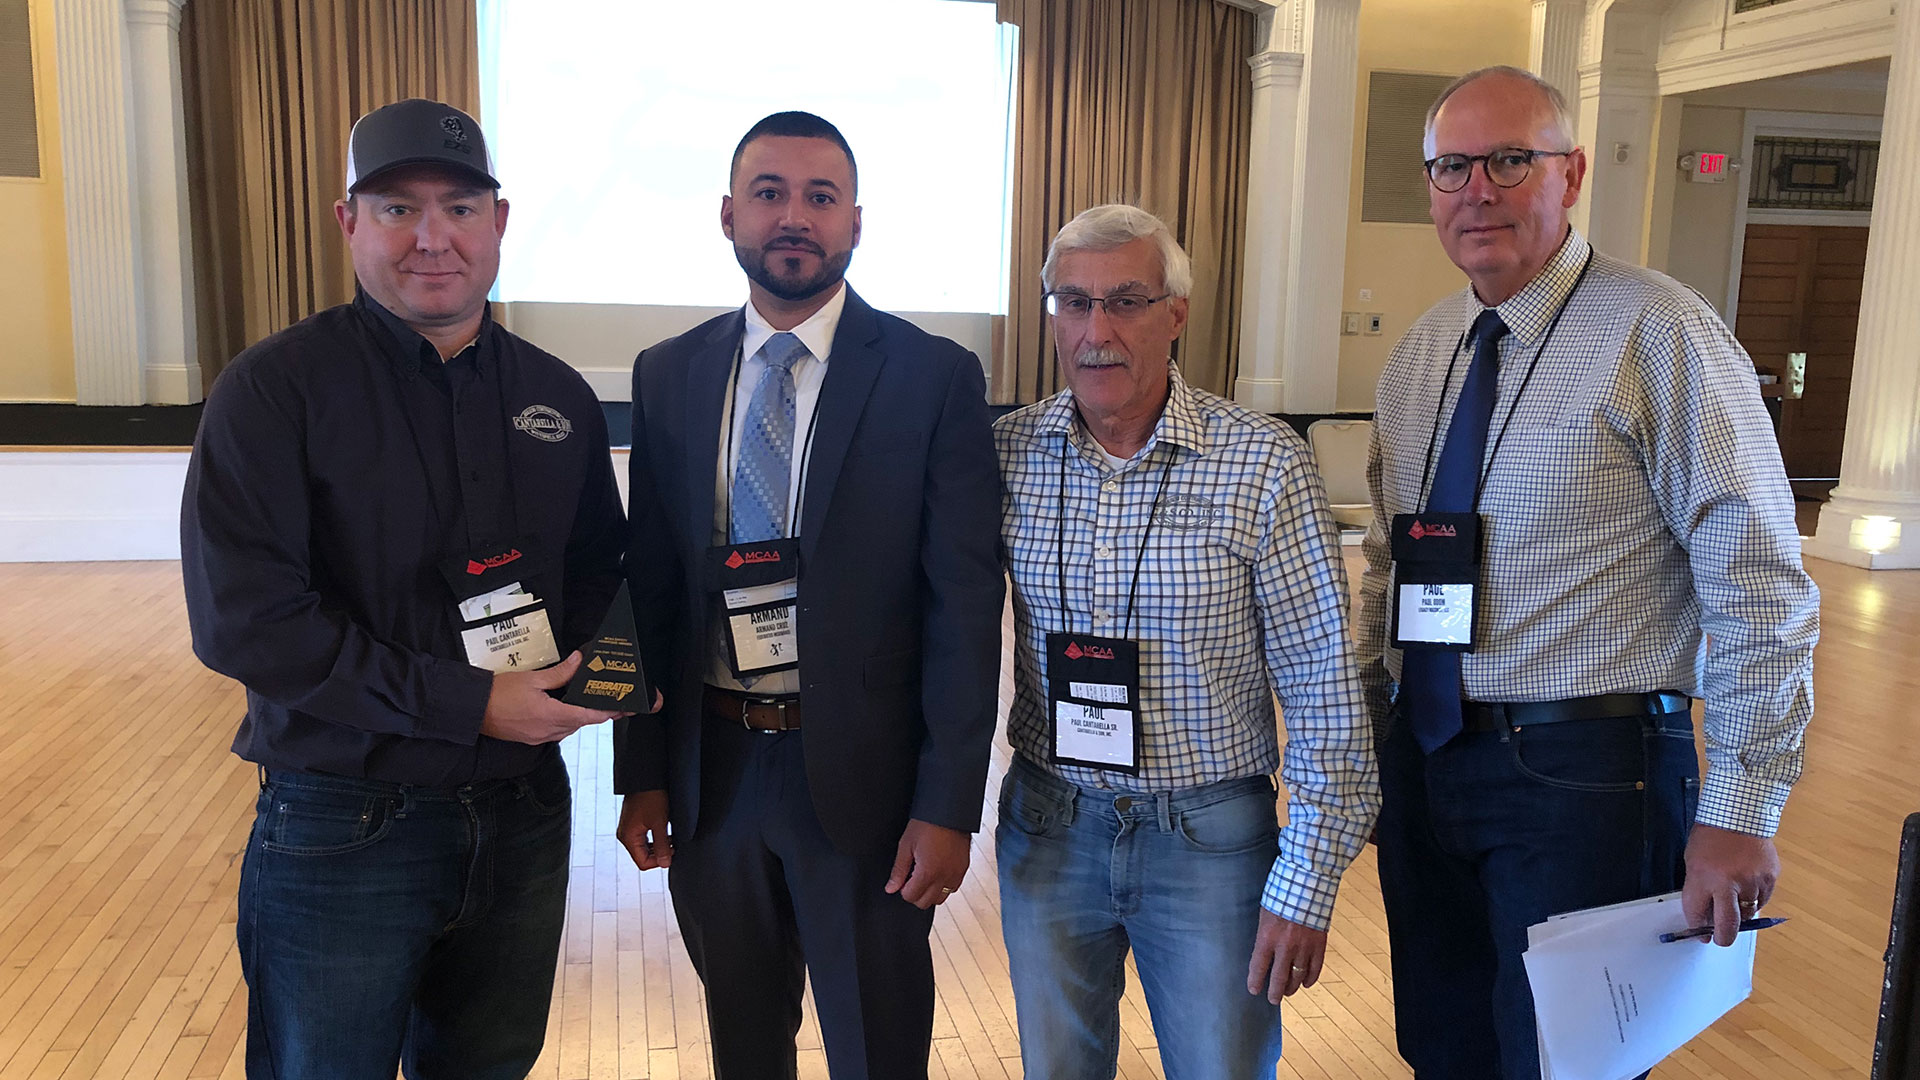 Paul Cantarella Jr. (left) and Paul Cantarella Sr. (center, right) are presented the MCAA Safety Advantage Award by Armand Cruz of Federated Insurance (center, left) and Paul Odom (right).